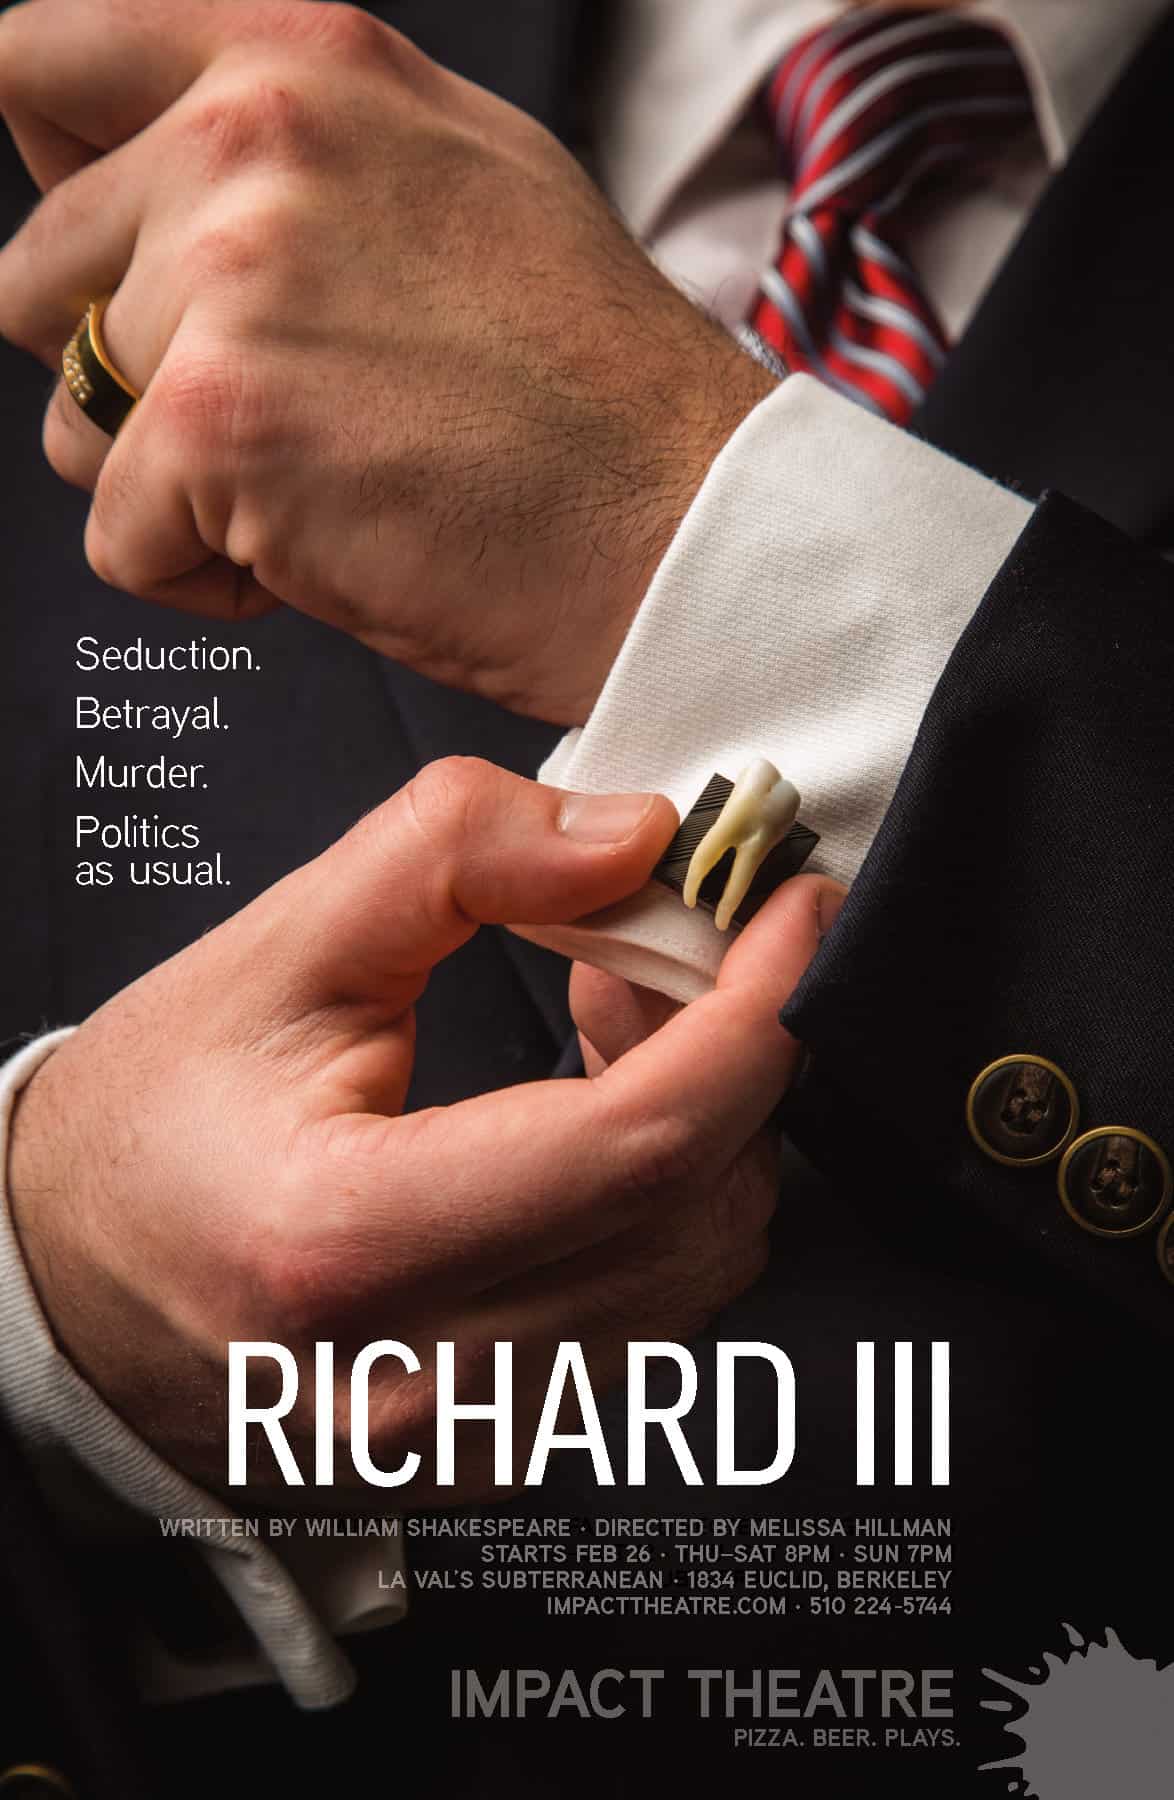 Poster for Shakespeare's "Richard III" at Impact Theatre. The image is a photo closeup of a man in a conservative suit and tie like that of a politician, viewed from the collar to the chest. The focus is on his fingers affixing a cuff link that is adorned with an actual human tooth.